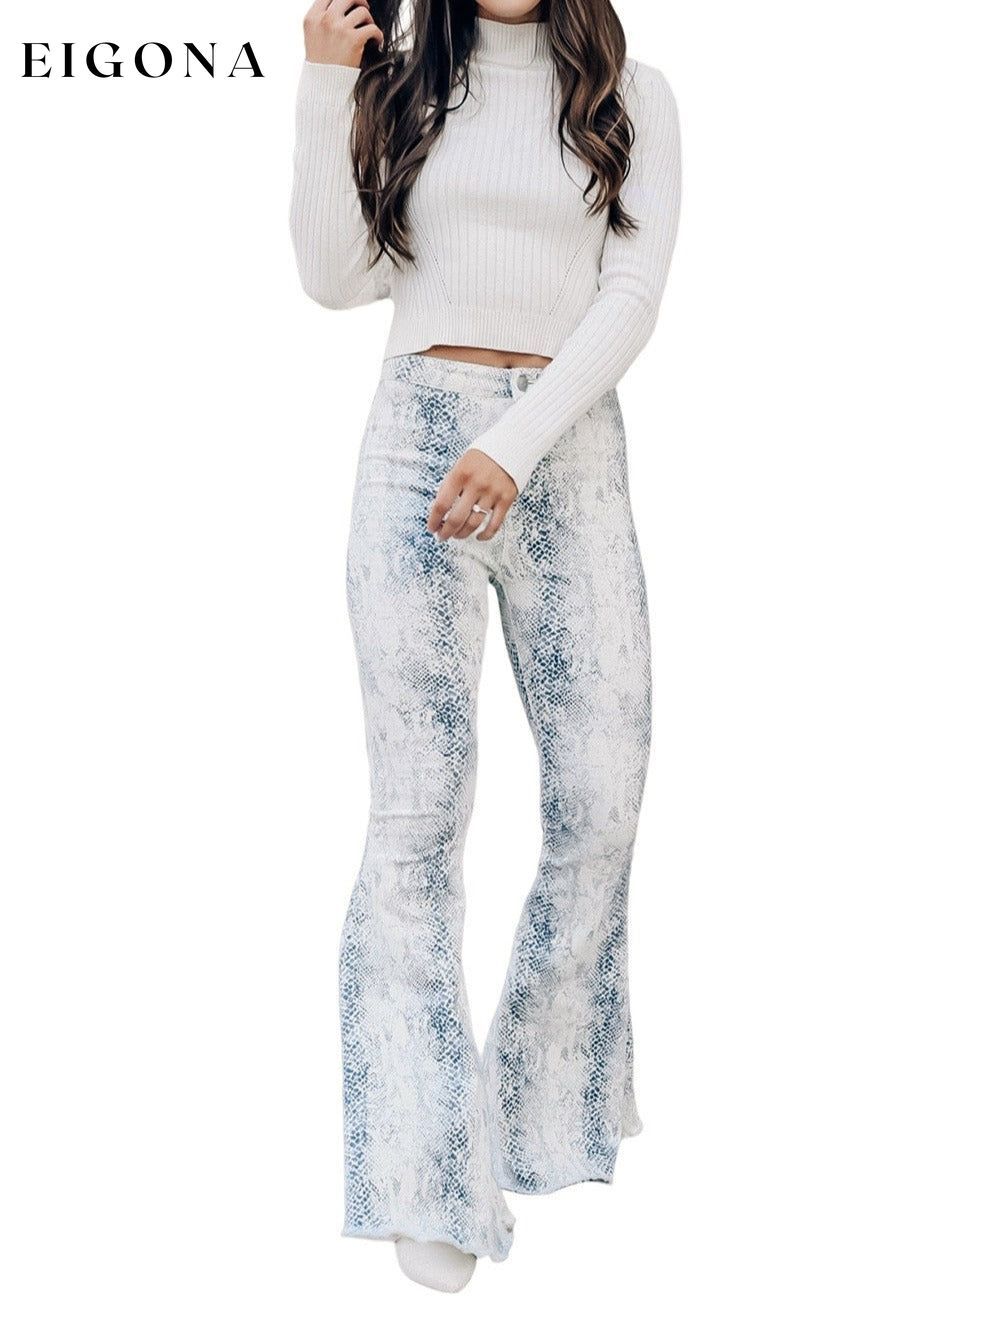 White Western Fashion High Waist Snakeskin Print Flare Pants All In Stock bottoms clothes Flare Jeans Jeans Occasion Daily pants Season Fall & Autumn Silhouette Flare Style Western wide leg pants